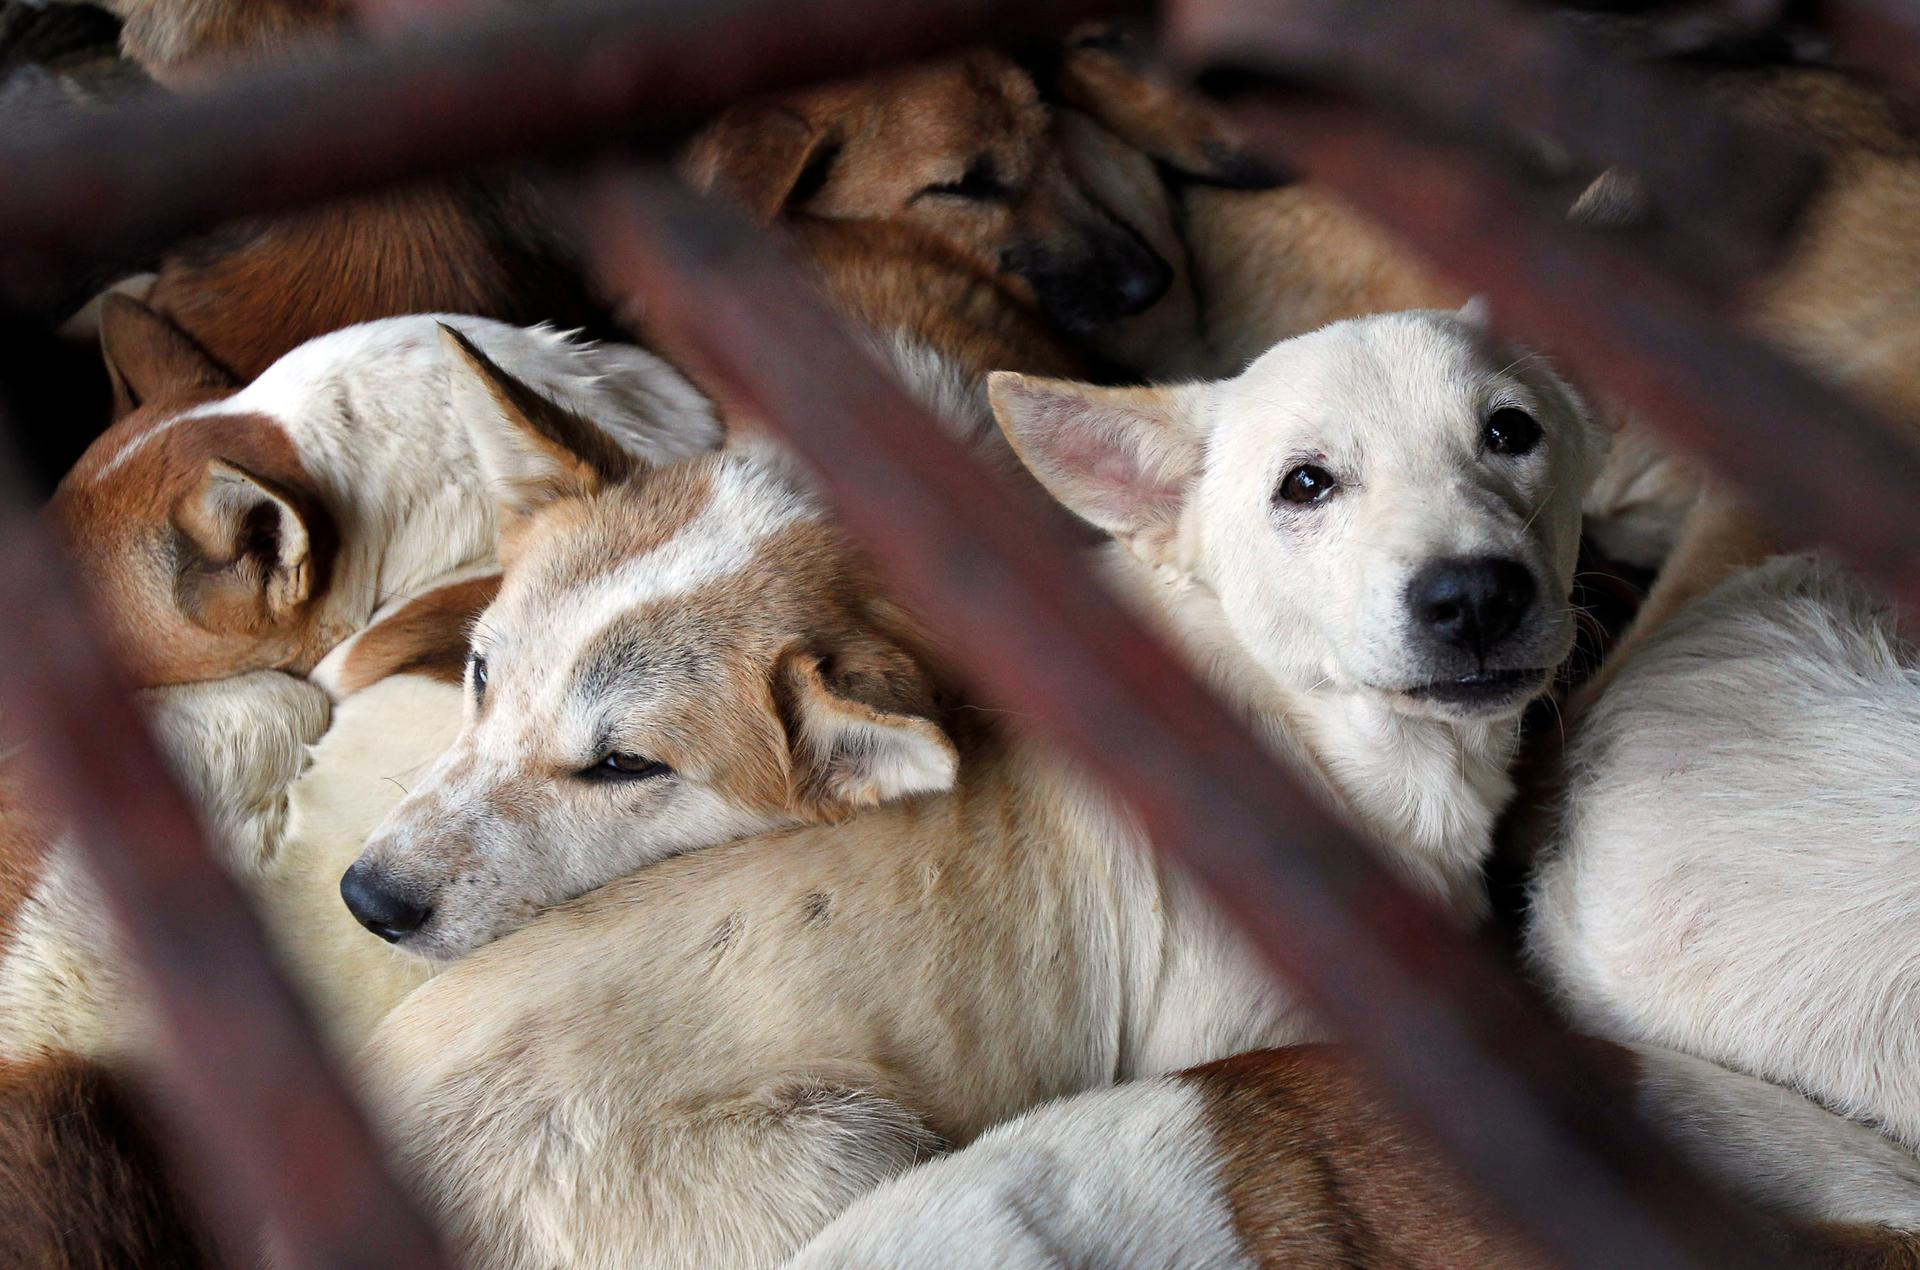 Dogs wait to be slaughtered in a cage for sale as food in Duong Noi village outside Hanoi, 2011. 